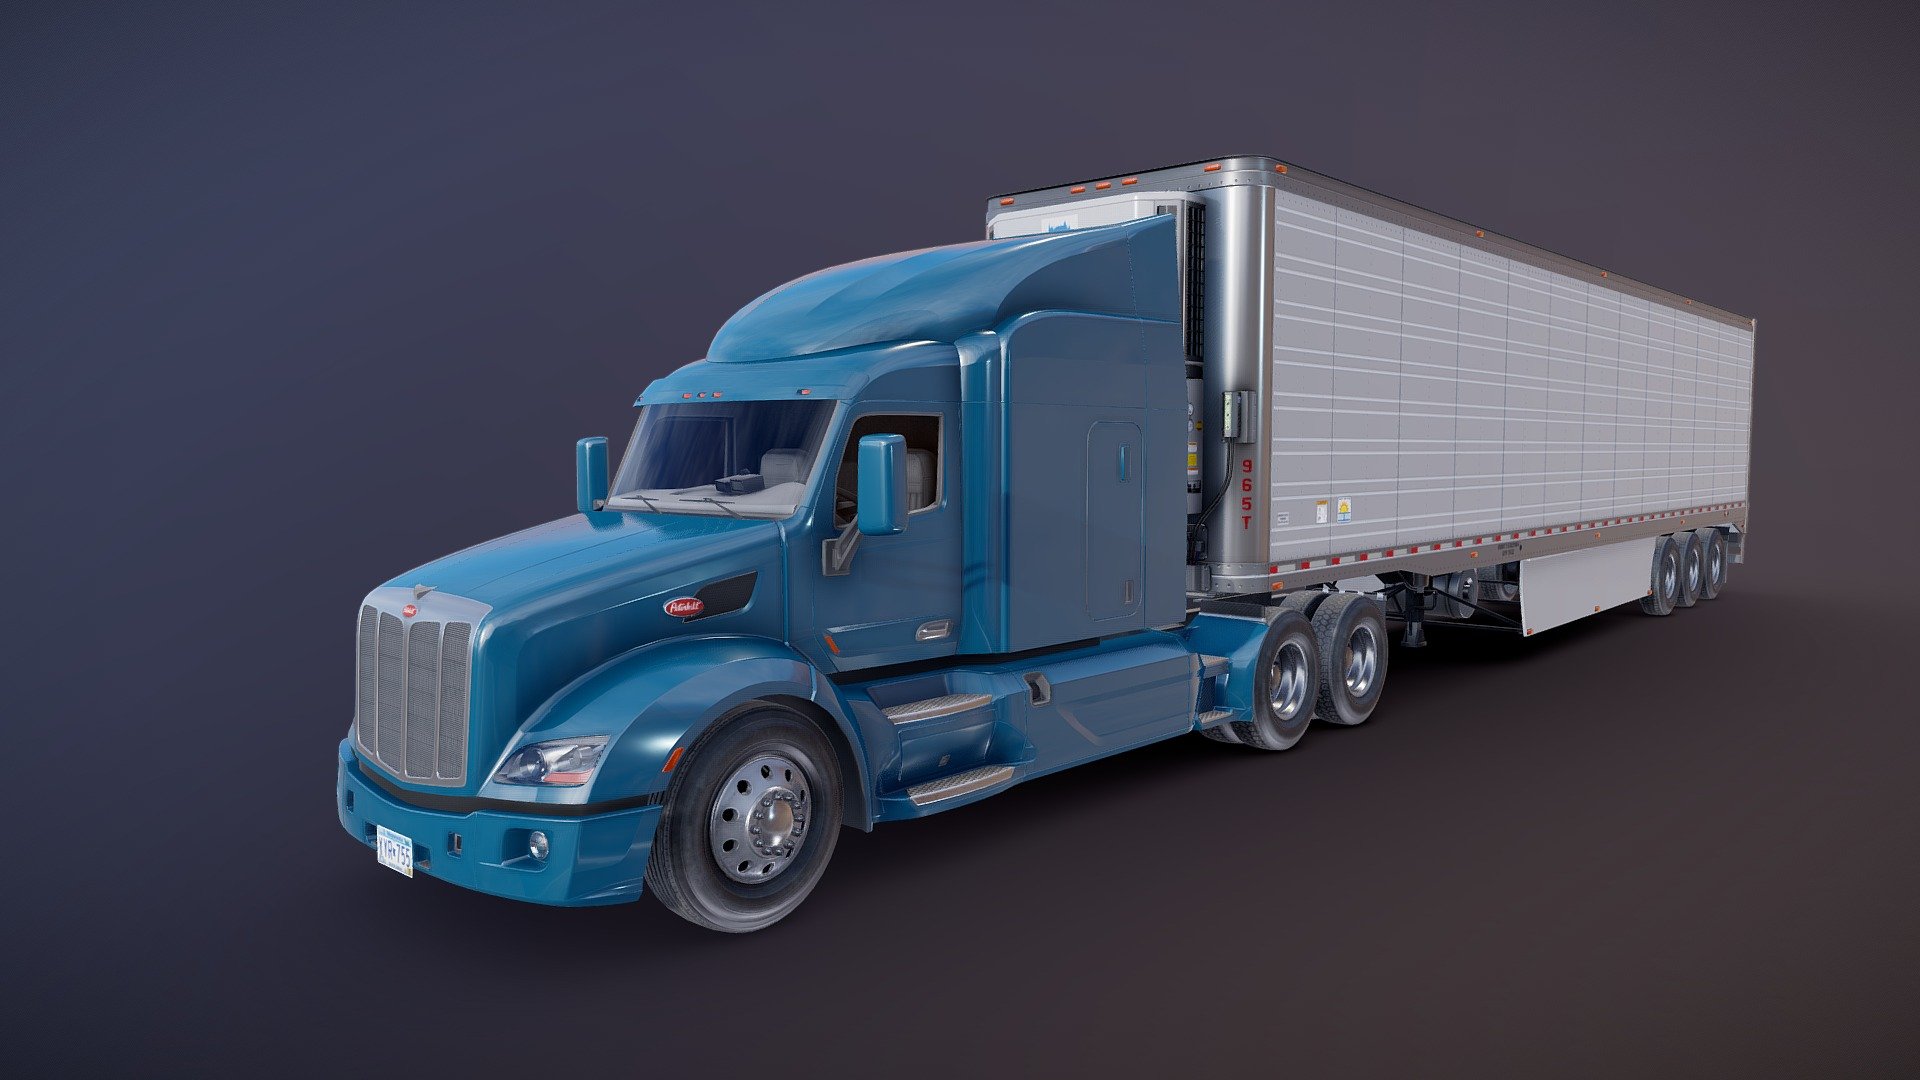 Peterbilt 579 truck game ready model.

Full textured model with clean topology.

High accuracy exterior model

Different tires for rear and front wheels.

Different wheels for rig and van trailer.

High detailed cabin - seams, rivets, chrome parts, wipers and etc.

Lowpoly interior - 2389 tris 1492 verts.

Wheels - 20774 tris 11352 verts.

Full model - 116614 tris 66671 verts.

High detailed rims and tires, with PBR maps(Base_Color/Metallic/Normal/Roughness.png2048x2048 )

Original scale.

Truck size

Lenght 9.8m , width 3.3m , height 4.5m.

Full size

Lenght 25m , width 3.3m , height 5.1m.

Model ready for real-time apps, games, virtual reality and augmented reality.

Asset looks accuracy and realistic and become a good part of your project 3d model